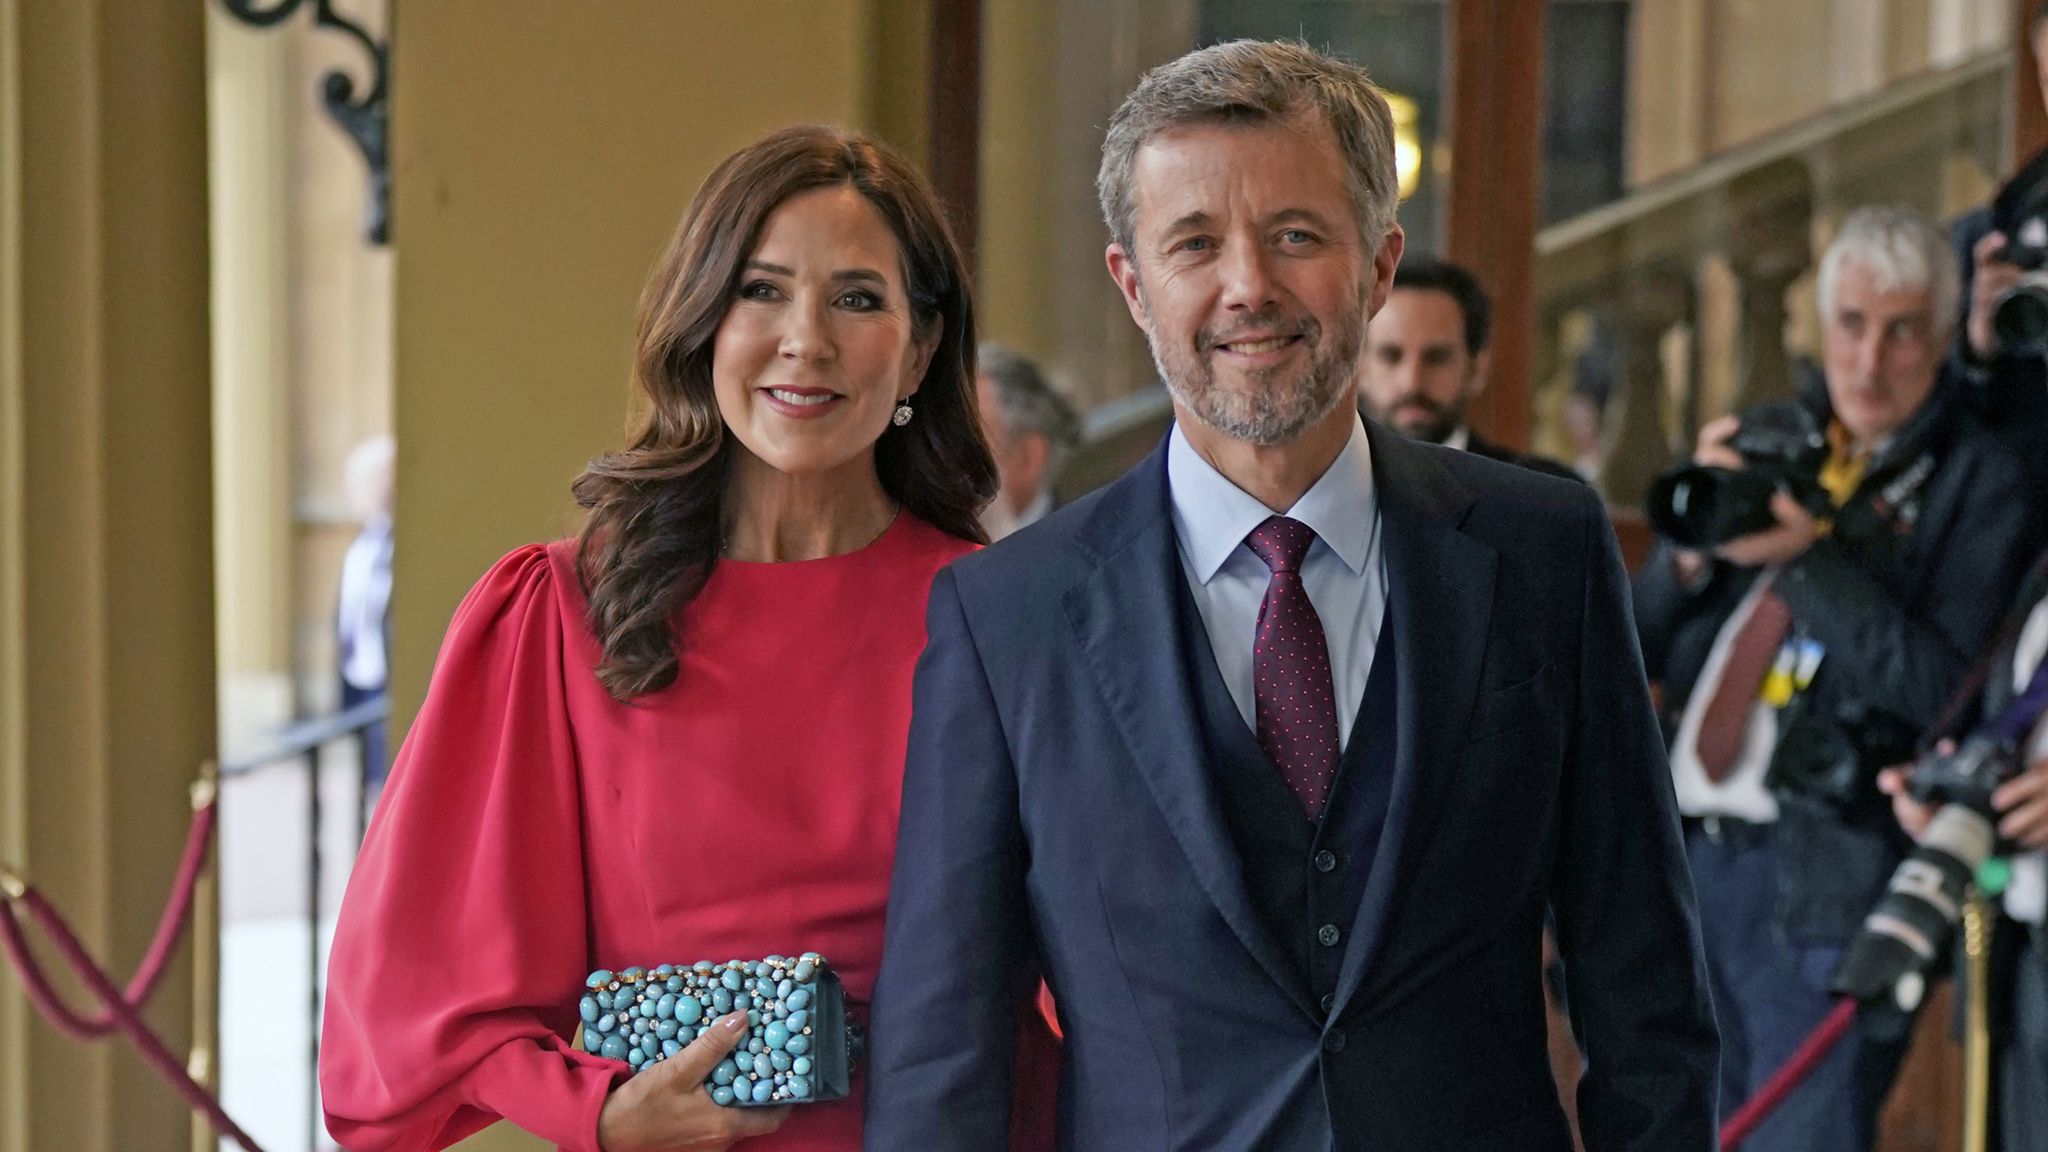 King Frederik X: Who is the former 'party prince' and Denmark's new ...